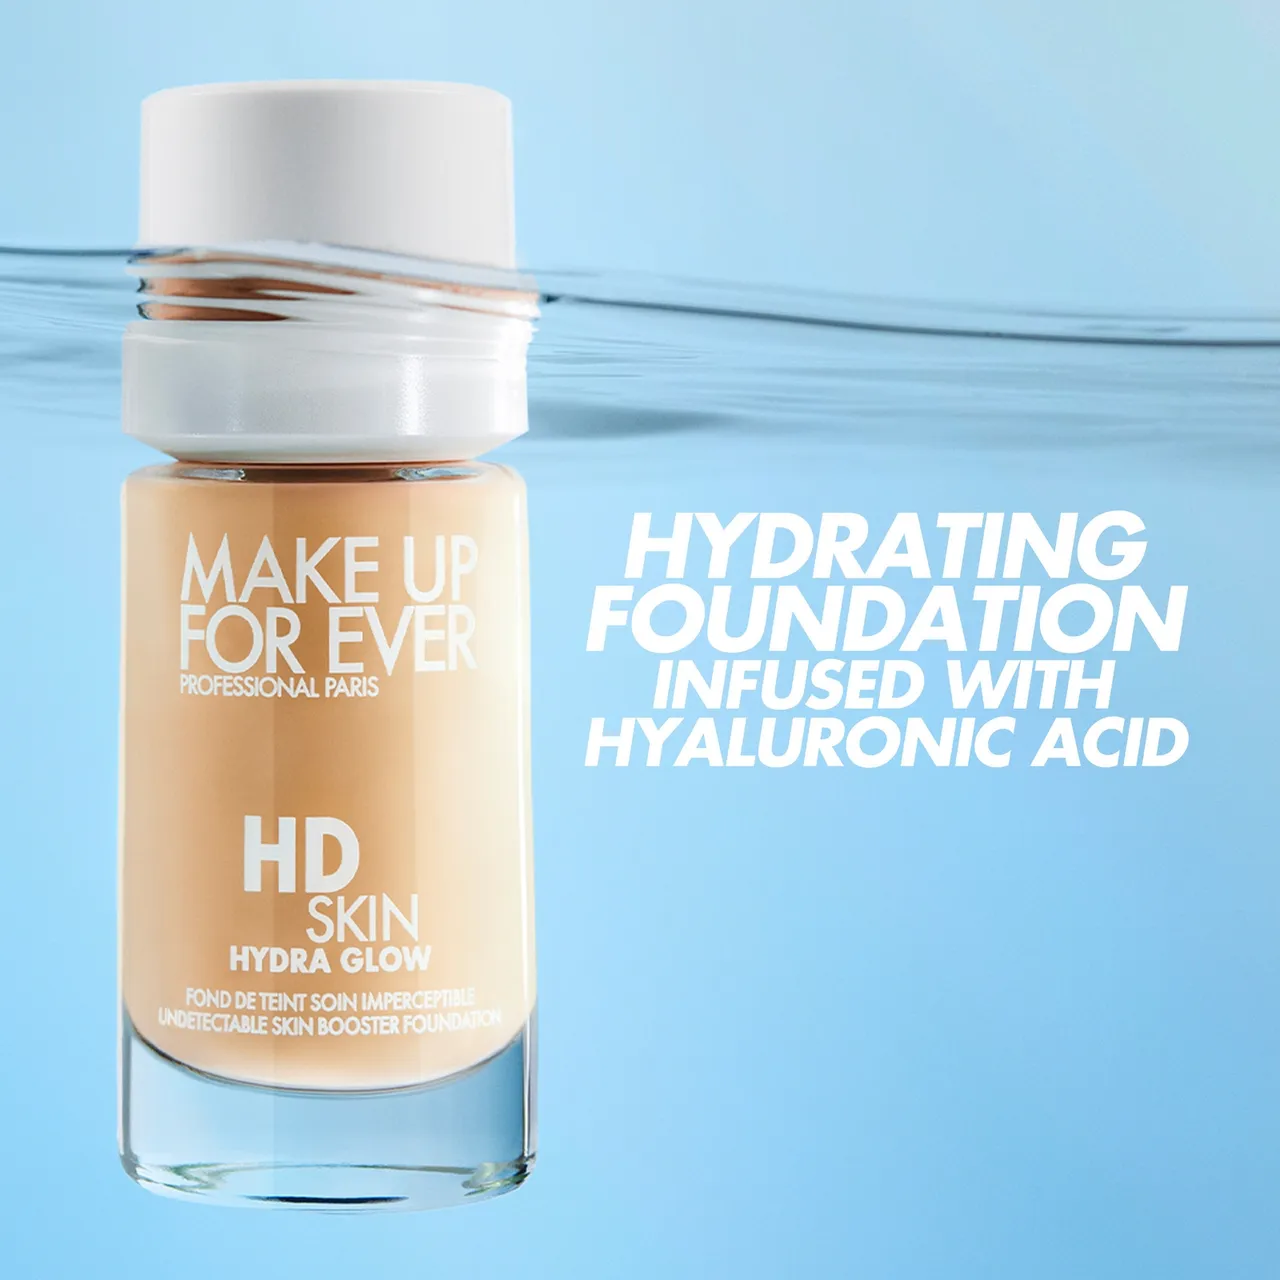 MAKE UP FOR EVER HD SKIN Hydra Glow Foundation 30ml (Various Shades) - 6 - 1N14